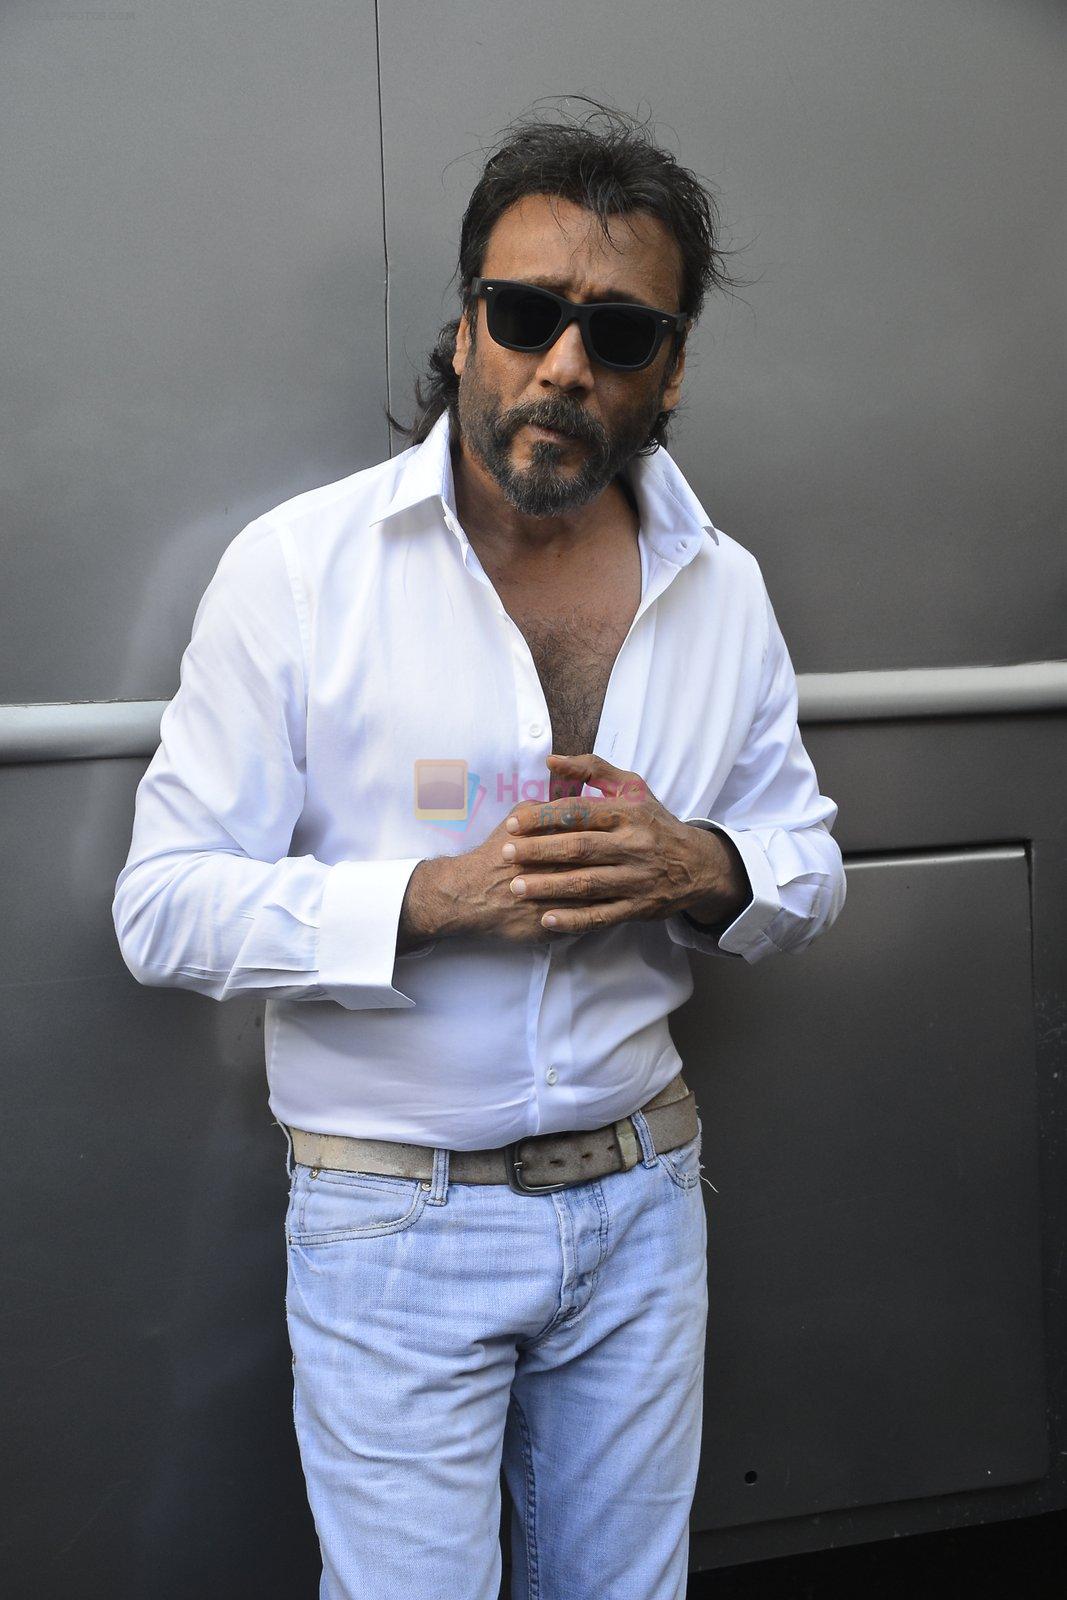 Jackie Shroff at Housefull 3 on the sets of The Kapil Sharma show on 9th May 2016